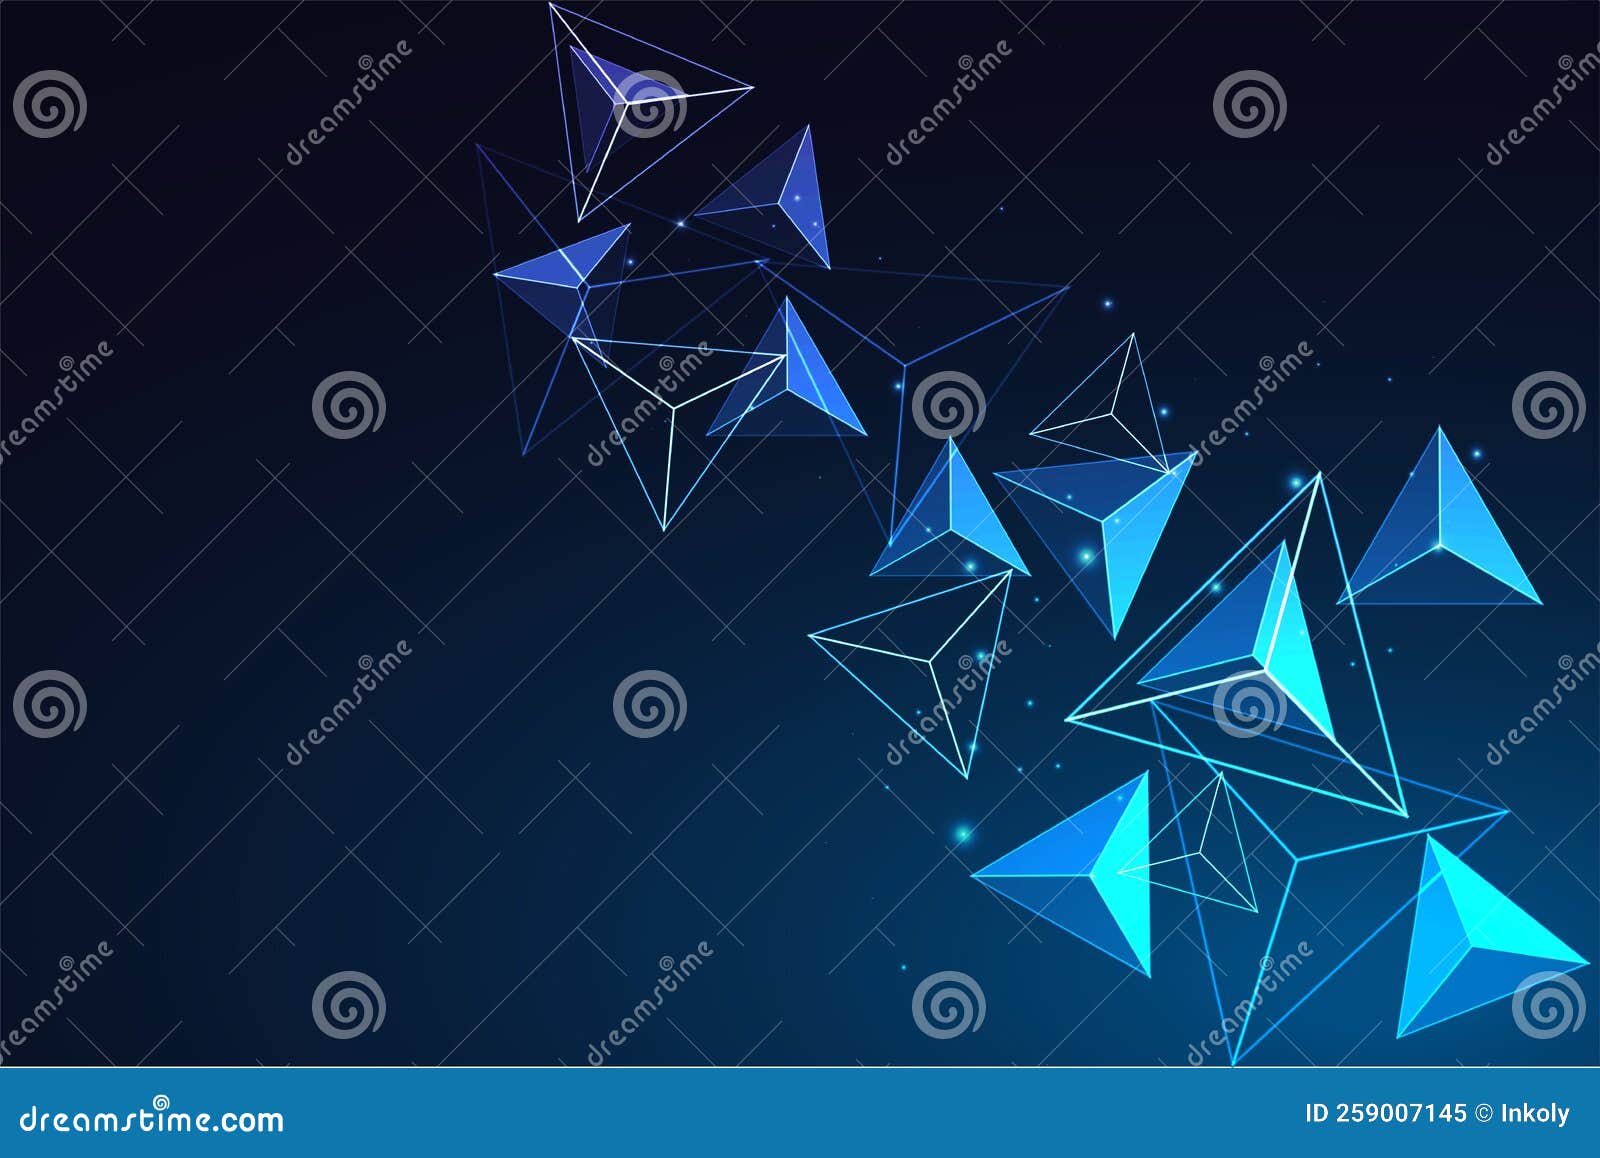 abstract futuristic dynamic banner with glowing blue triangles and tetrahedra on blue background